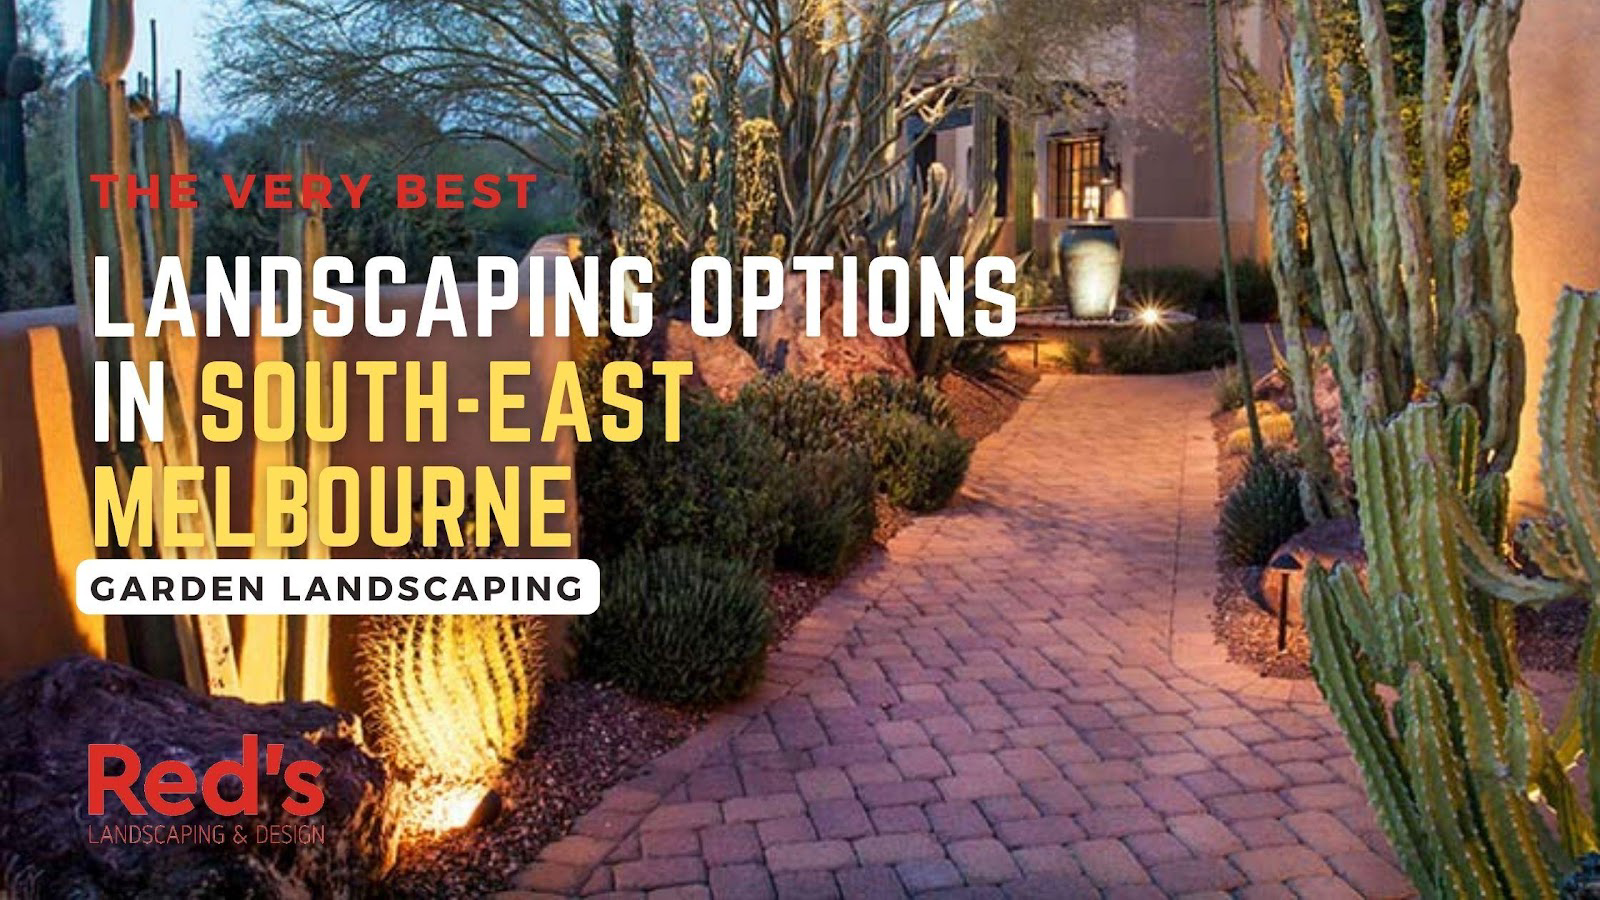 The Very Best Landscaping Options in Southeast Melbourne